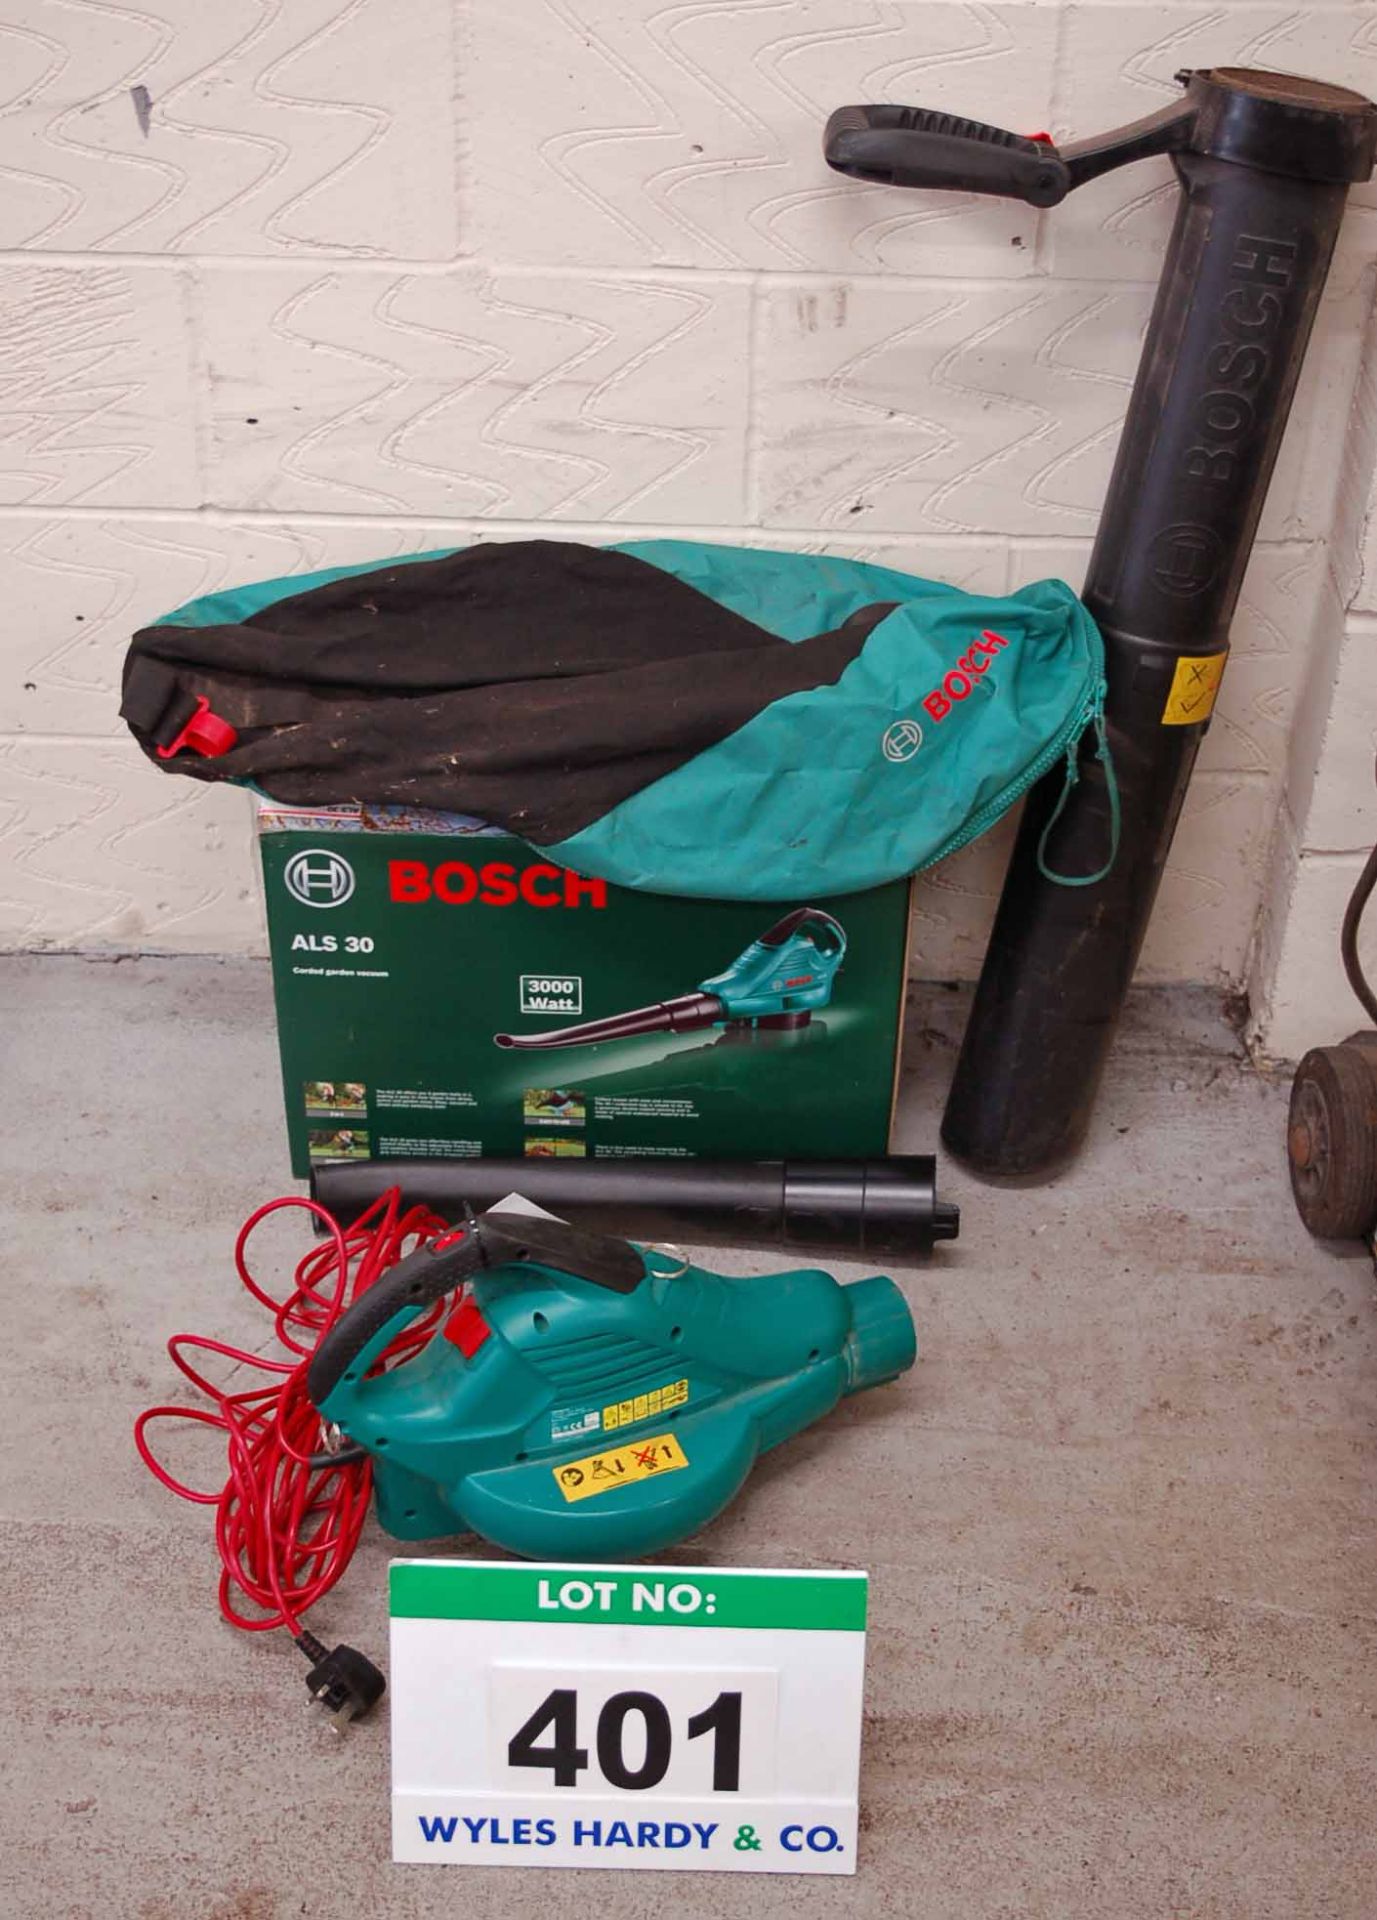 A Used BOSCH AL5 30 240V AC Hand Held Electric Corded Garden Vacuum with Blower Option and